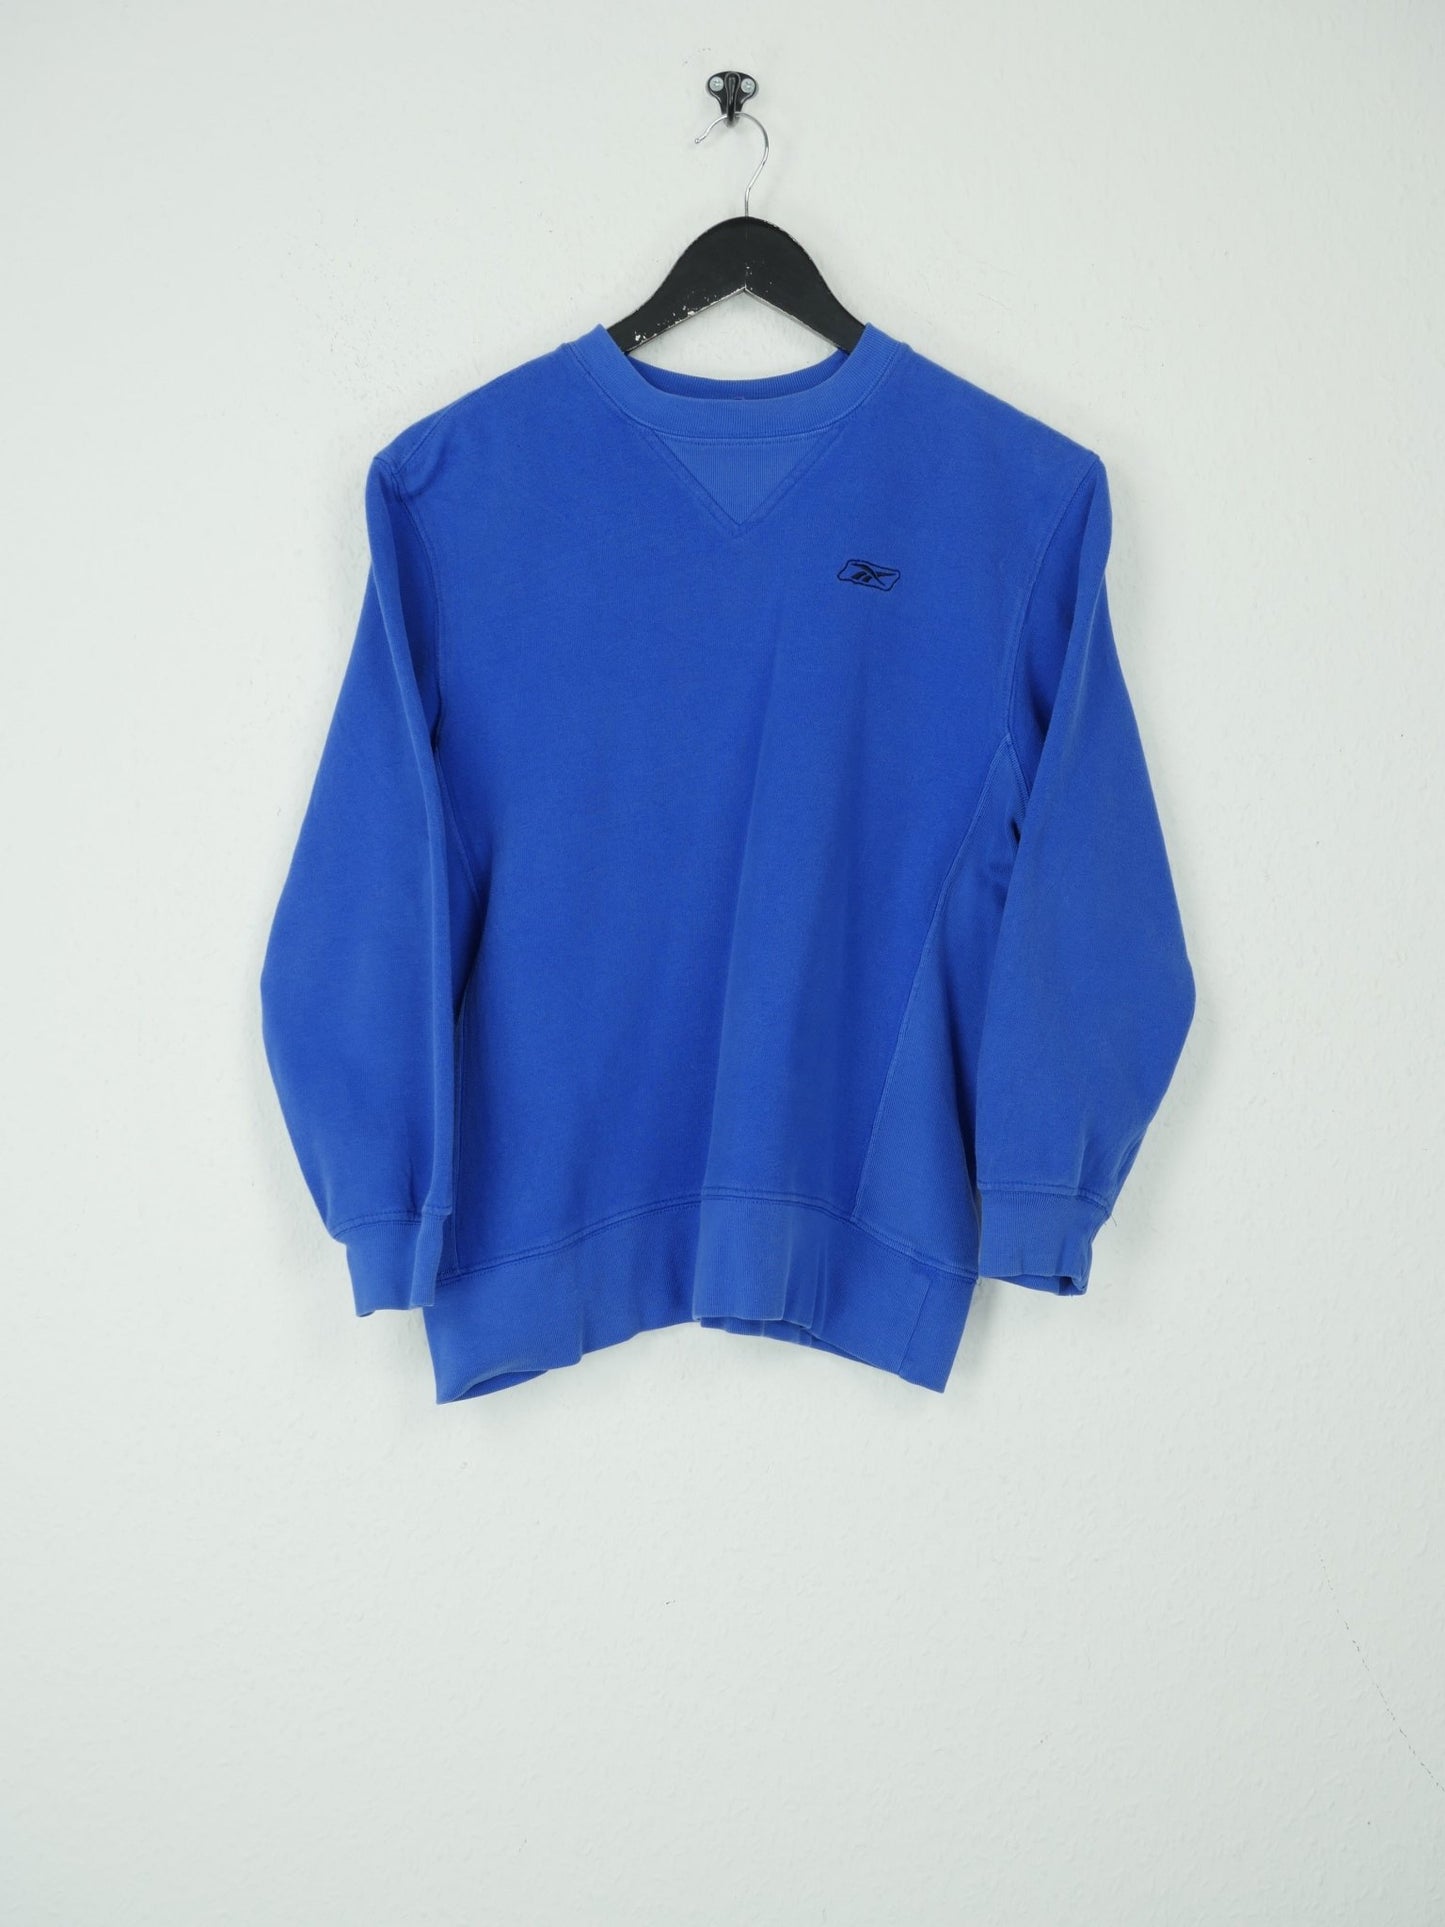 Reebok embroidered Logo Vintage washed blue Sweater - Peeces